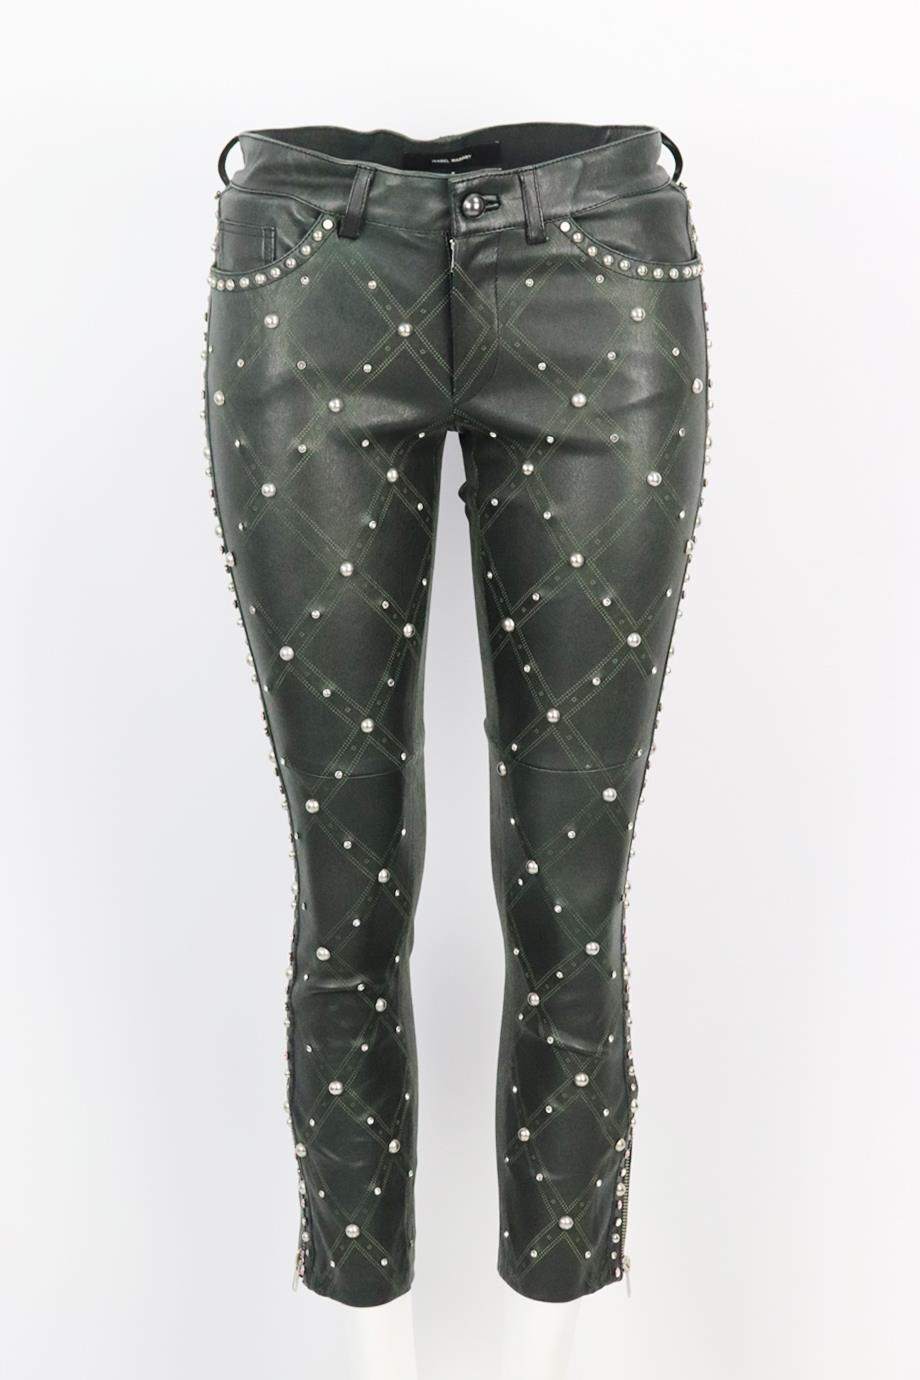 Isabel Marant studded stretch leather skinny pants. Green. Button and zip fastening at front. 100% Lambskin; fabric2: 97% cotton, 3% elastane; lining: 100% cotton. Size: FR 36 (UK 8, US 4, IT 40). Waist: 31 in. Hips: 36 in. Length: 33 in. Inseam: